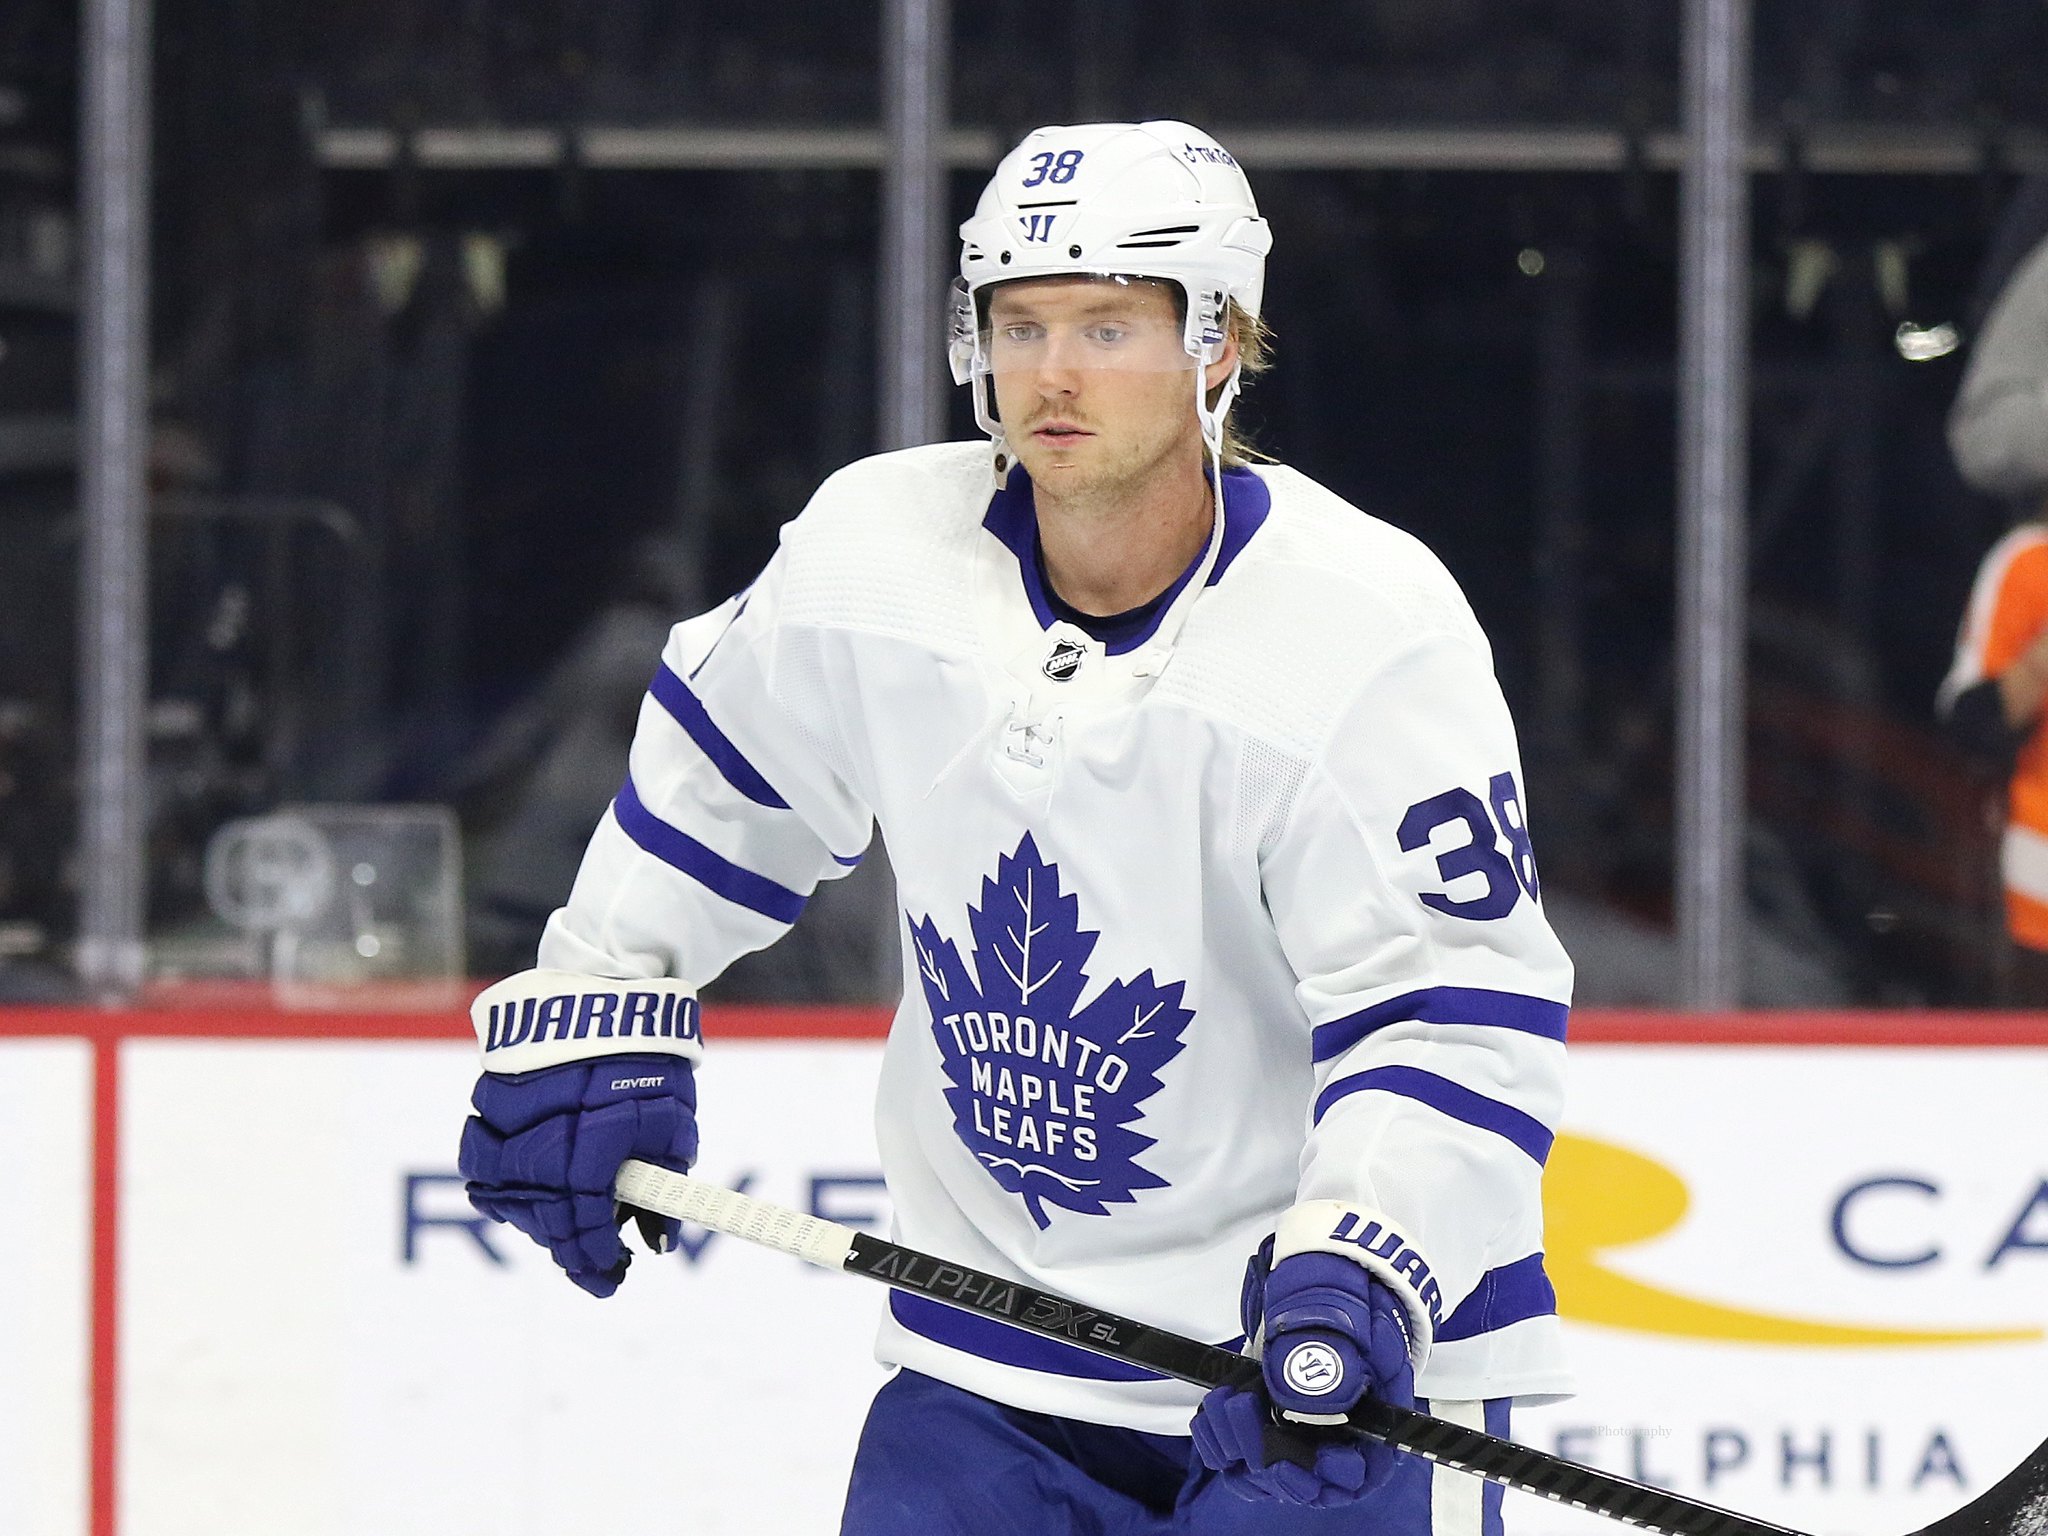 NHL: Maple Leafs' Sandin looked for mushrooms for distraction